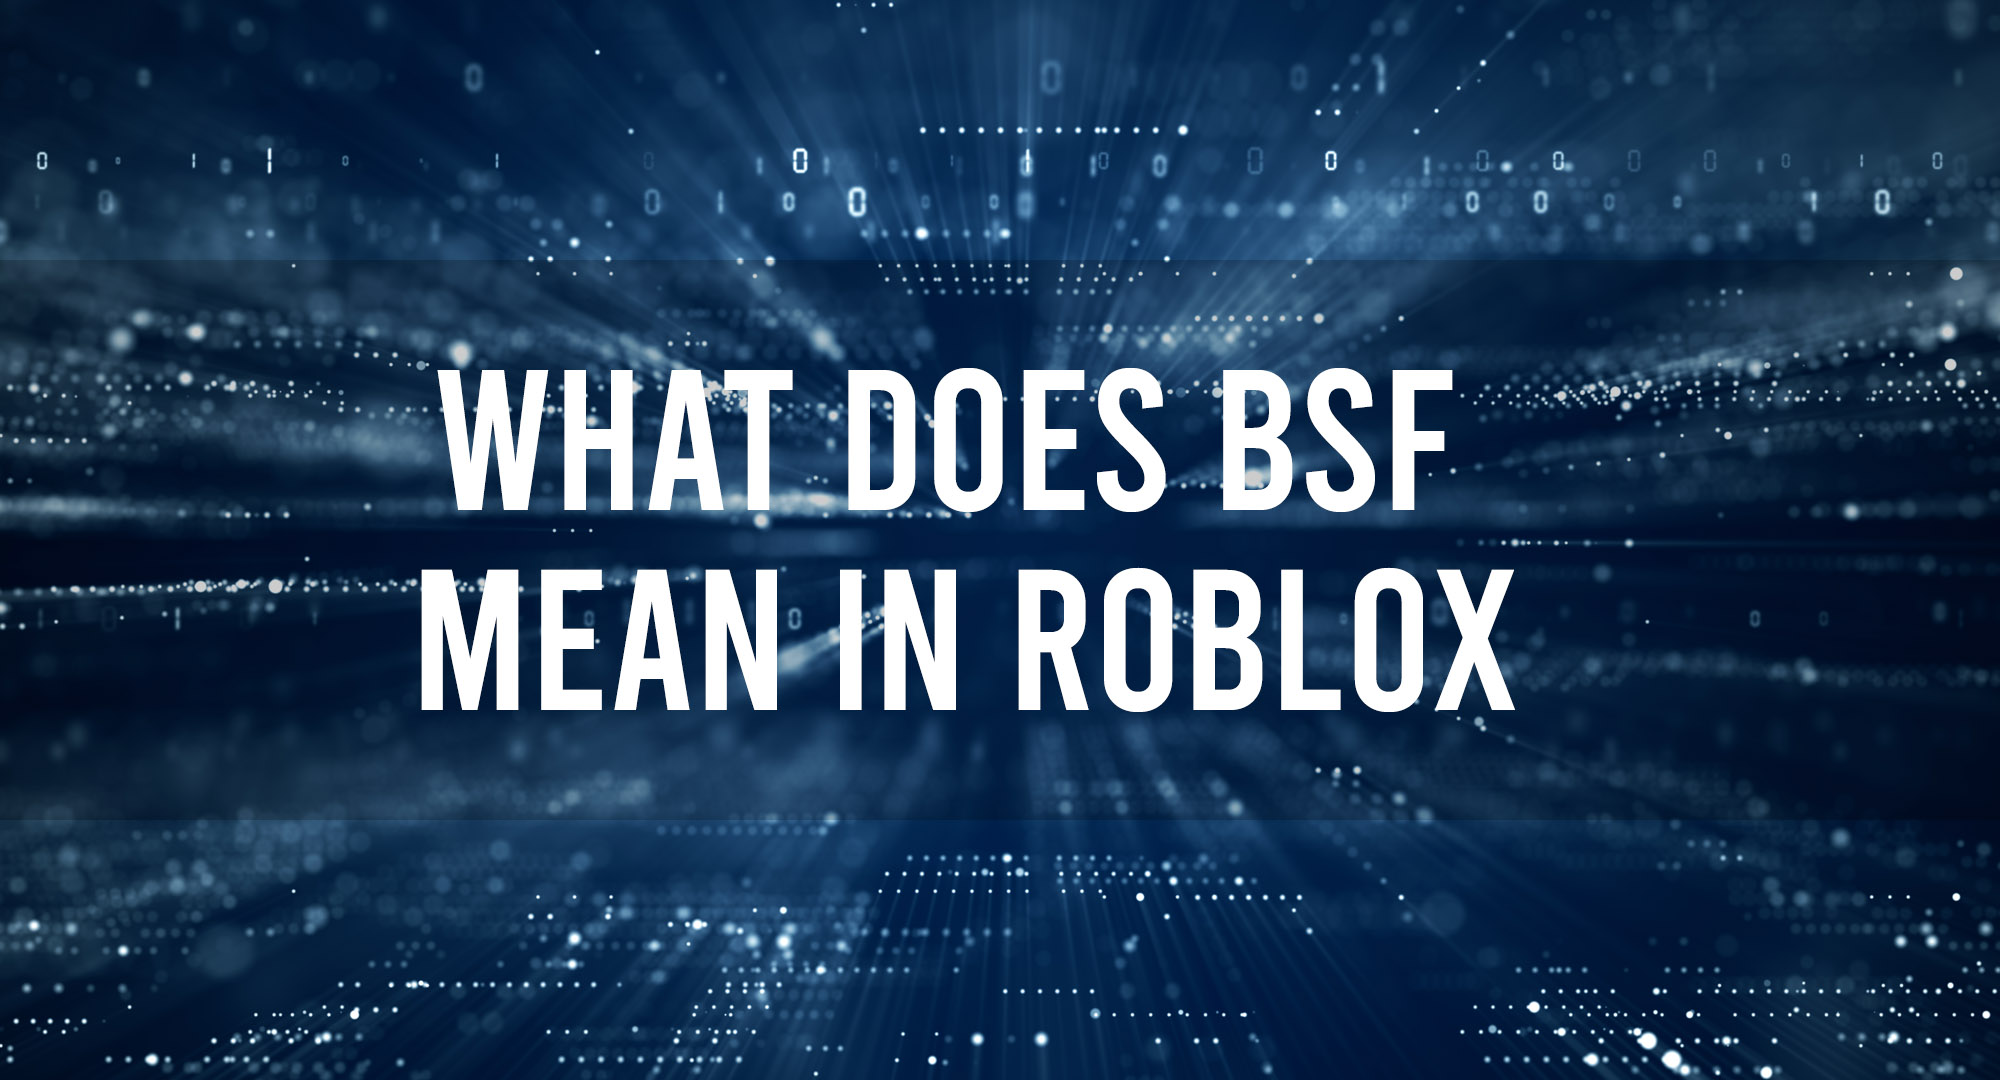 What does BSF Mean In Roblox